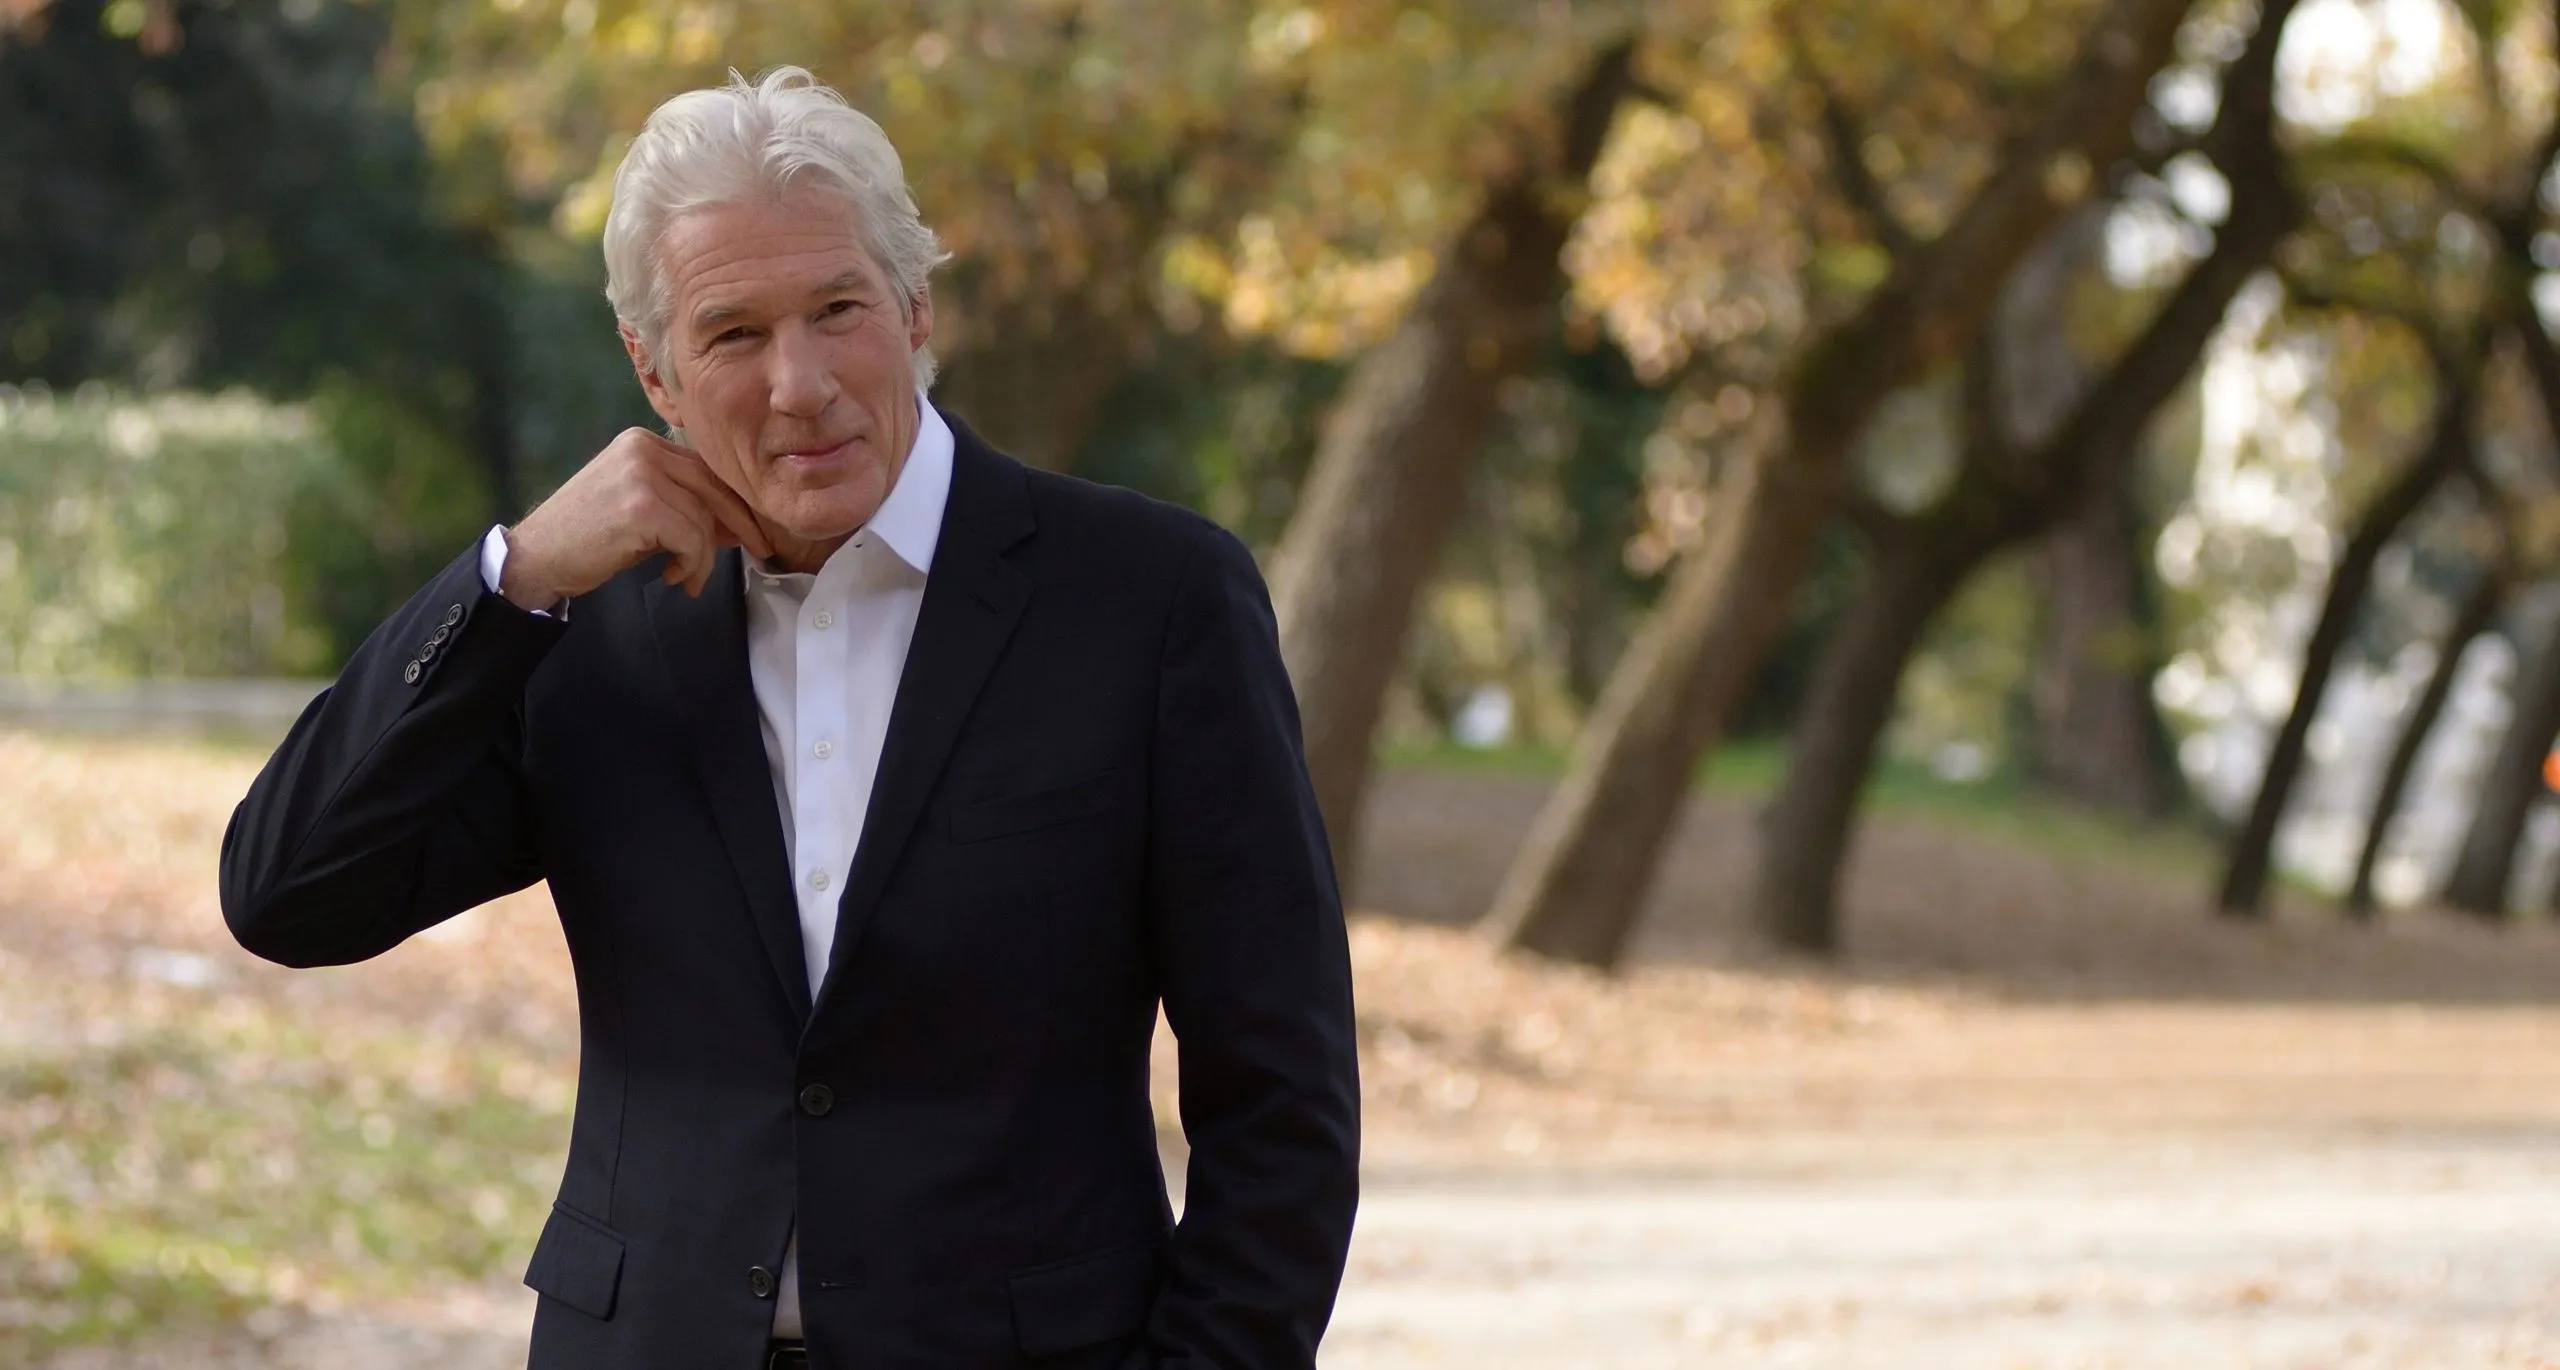 Richard Gere court appearance, Migrant advocacy, Humanitarian efforts, Charitable actions, 2560x1370 HD Desktop